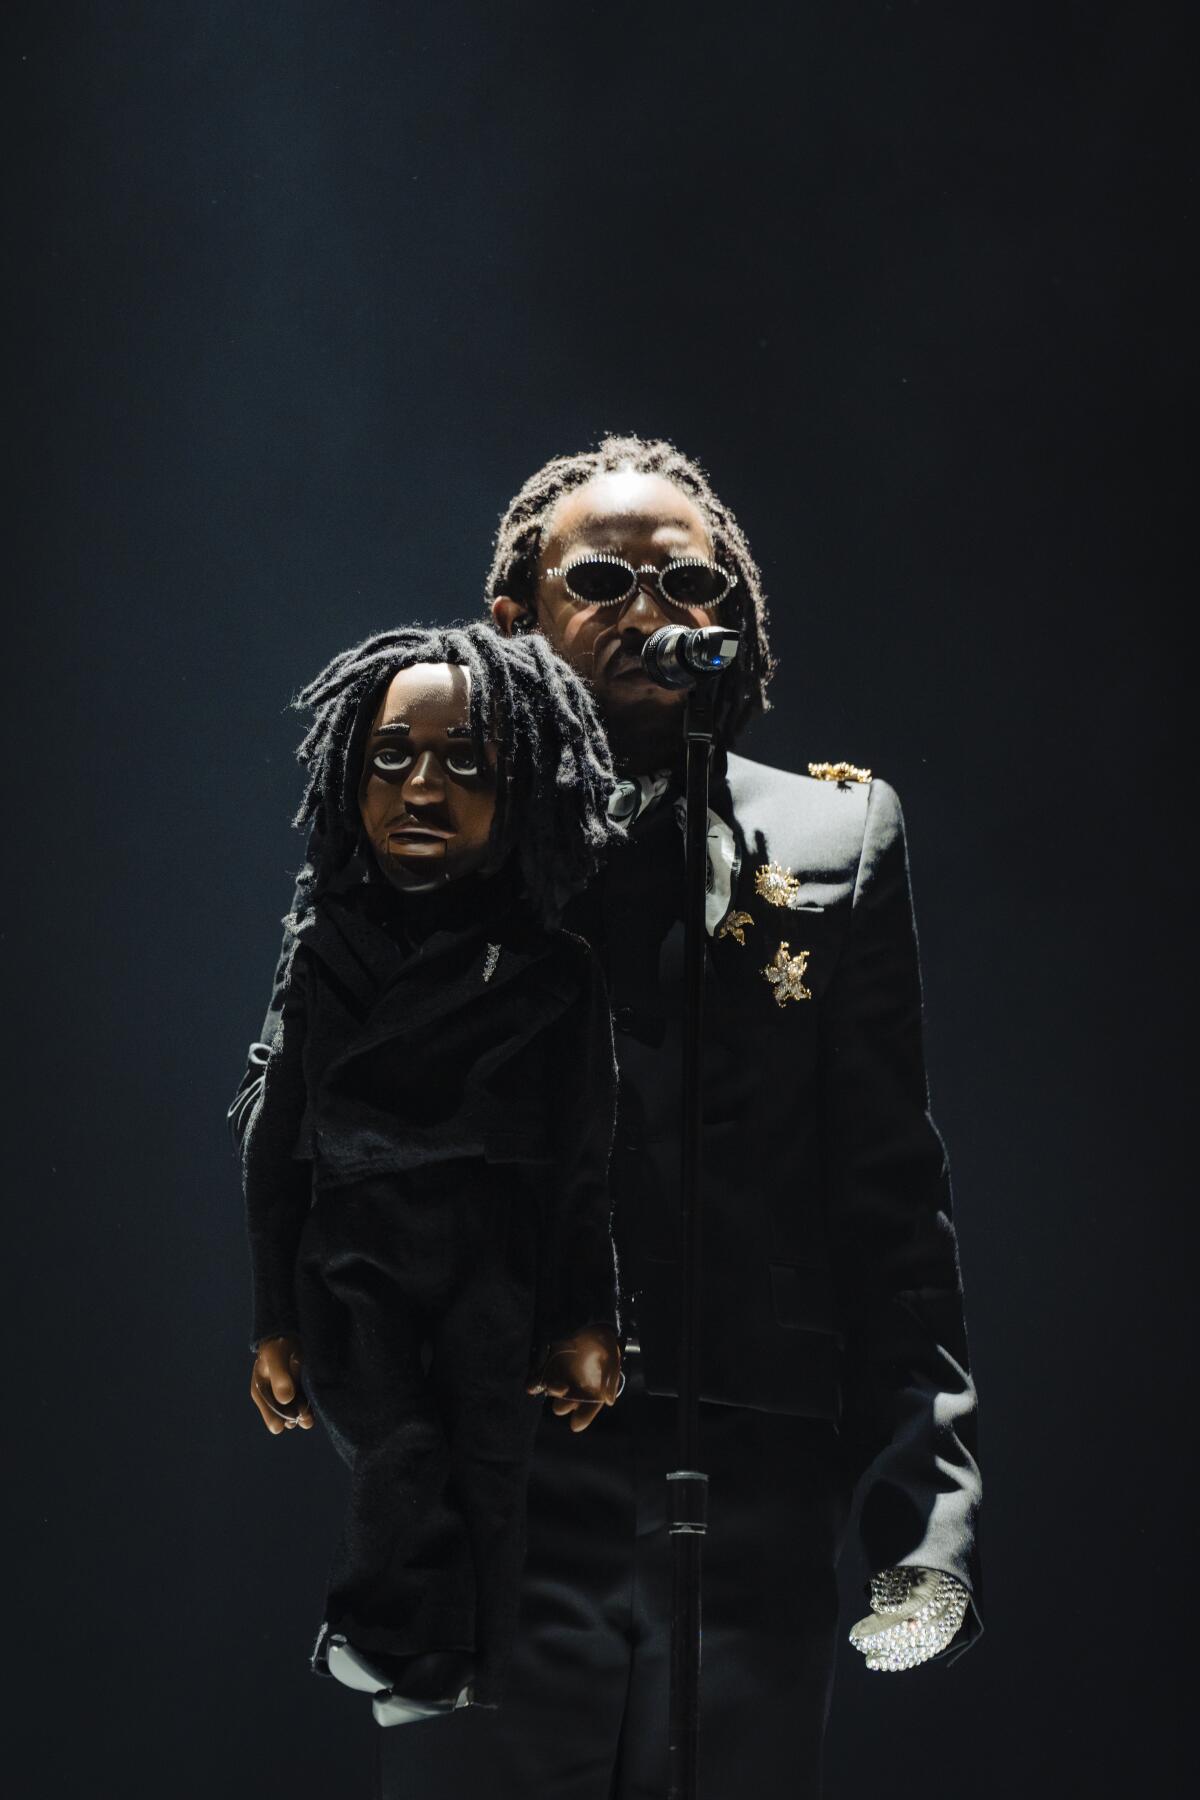 A rapper onstage with a ventriloquist dummy that looks like him.